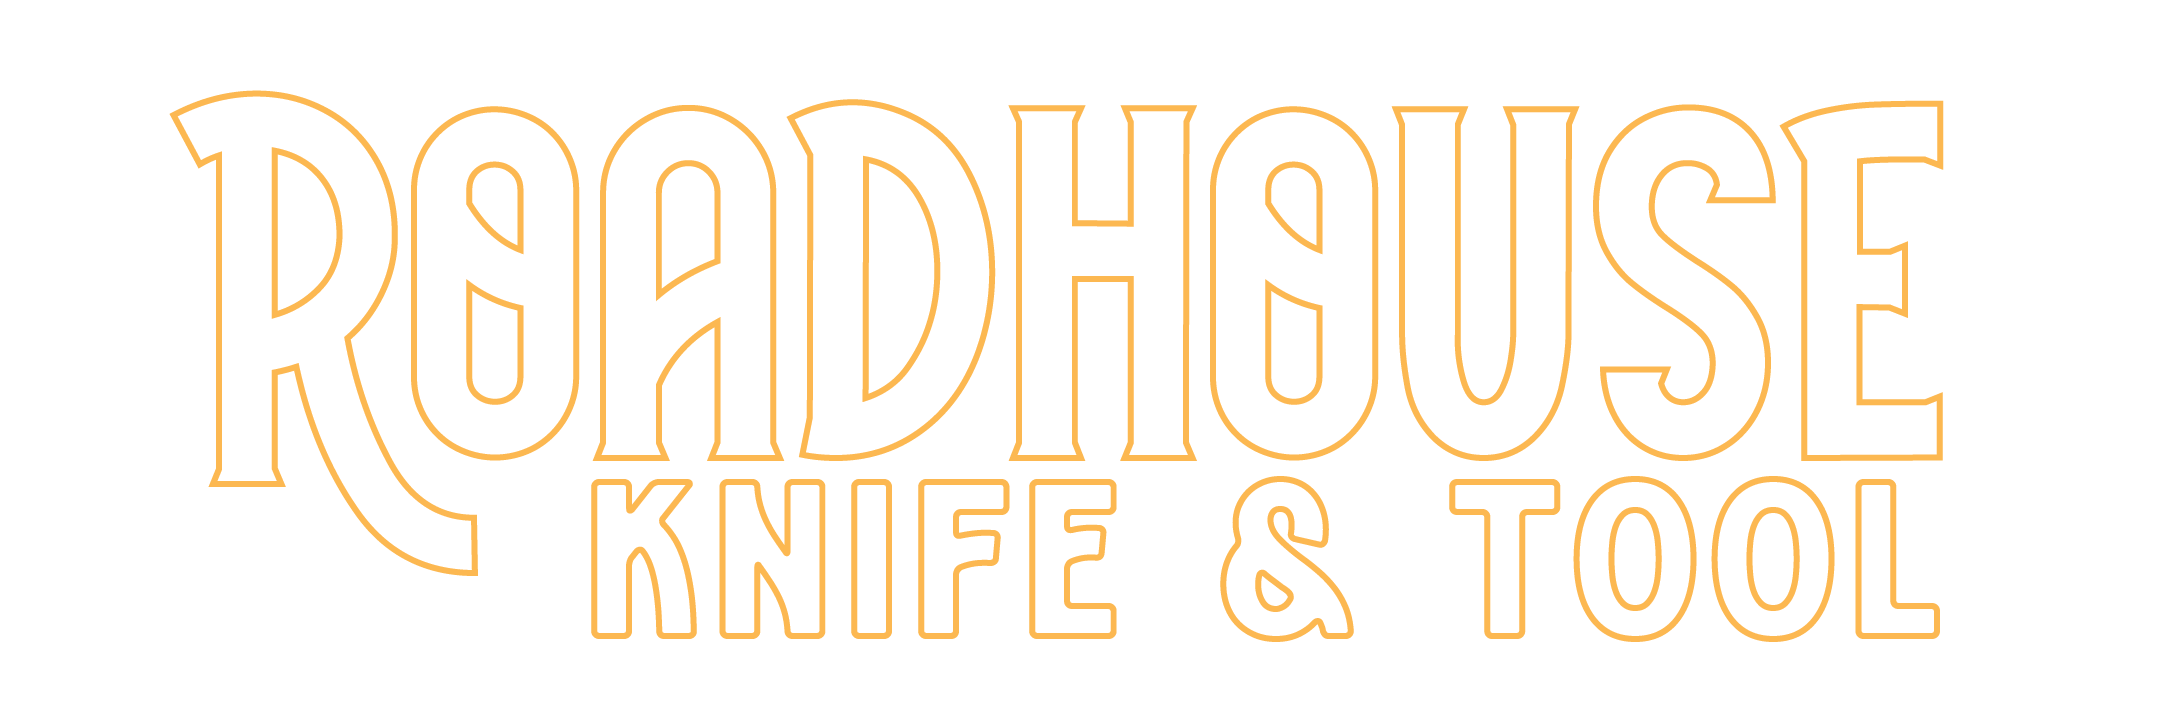 Roadhouse Knives